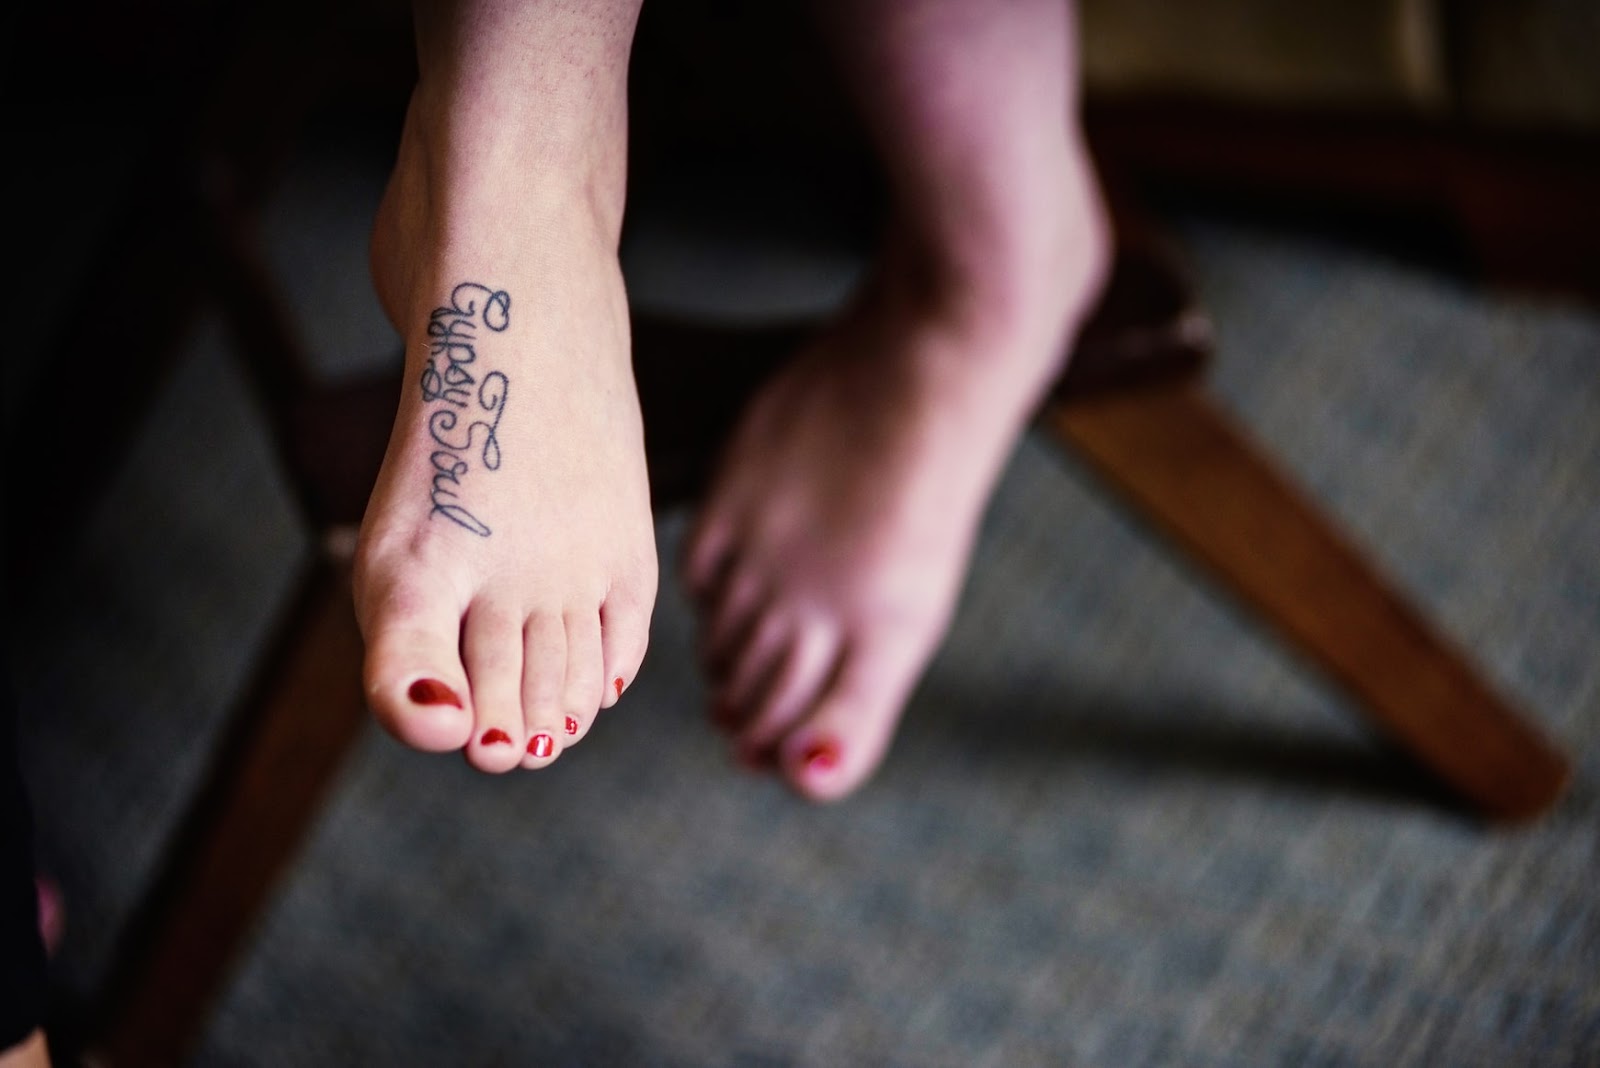 Bottom of the foot tattoos  YouTube